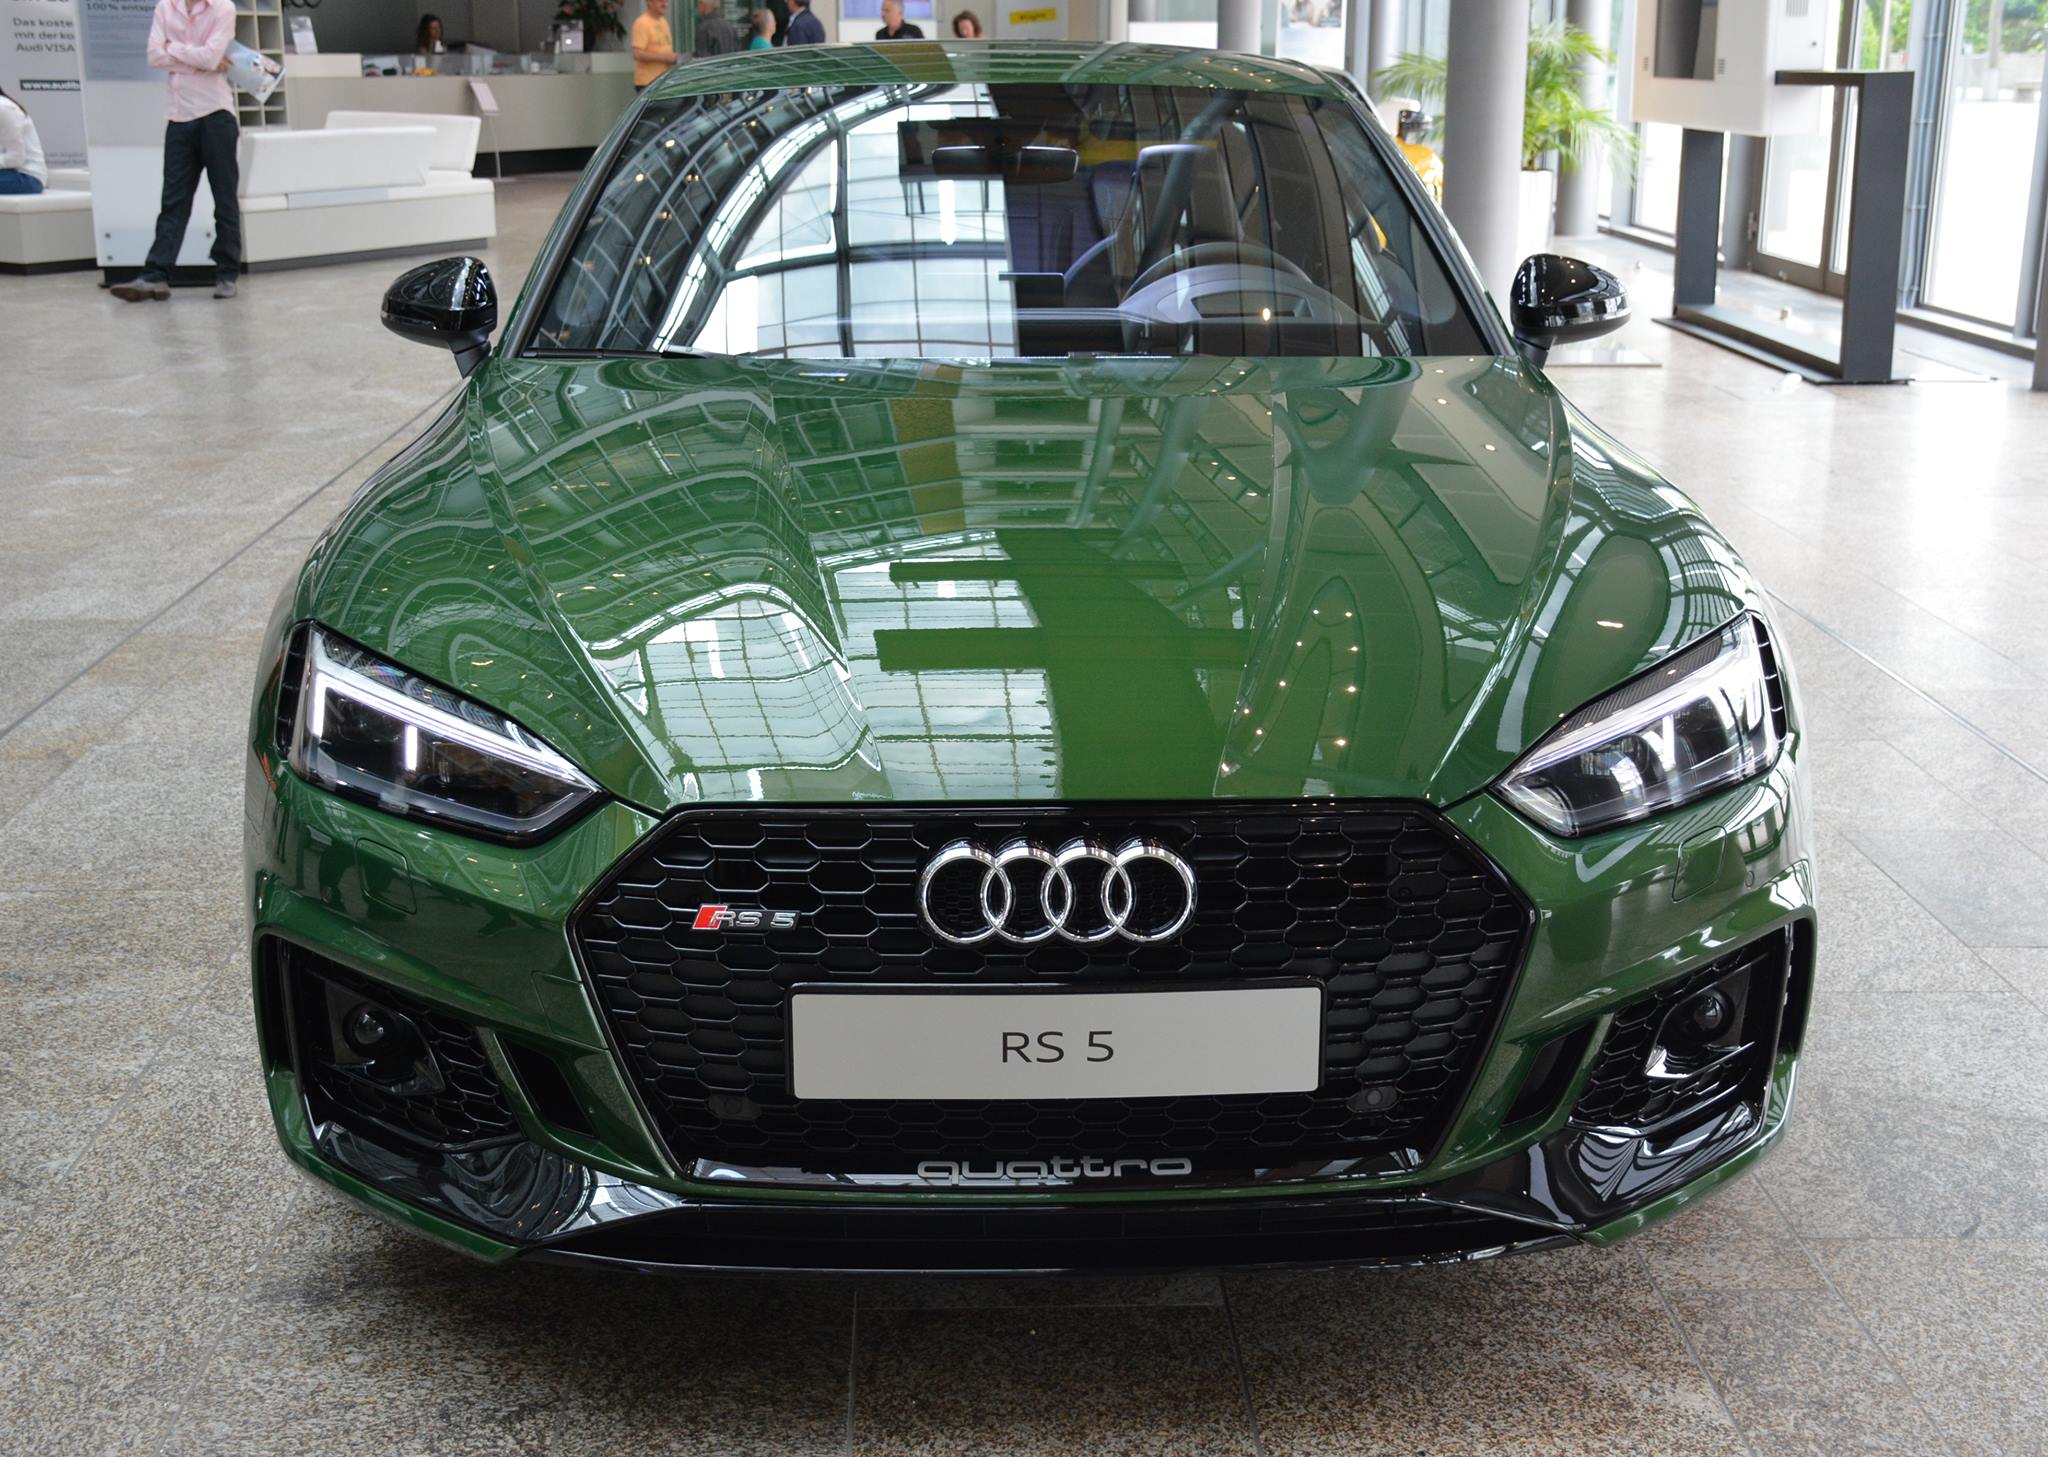 2018-audi-rs5-coupe-in-sonoma-green-spotted-at-audi-forum-ingolstadt_1.jpg